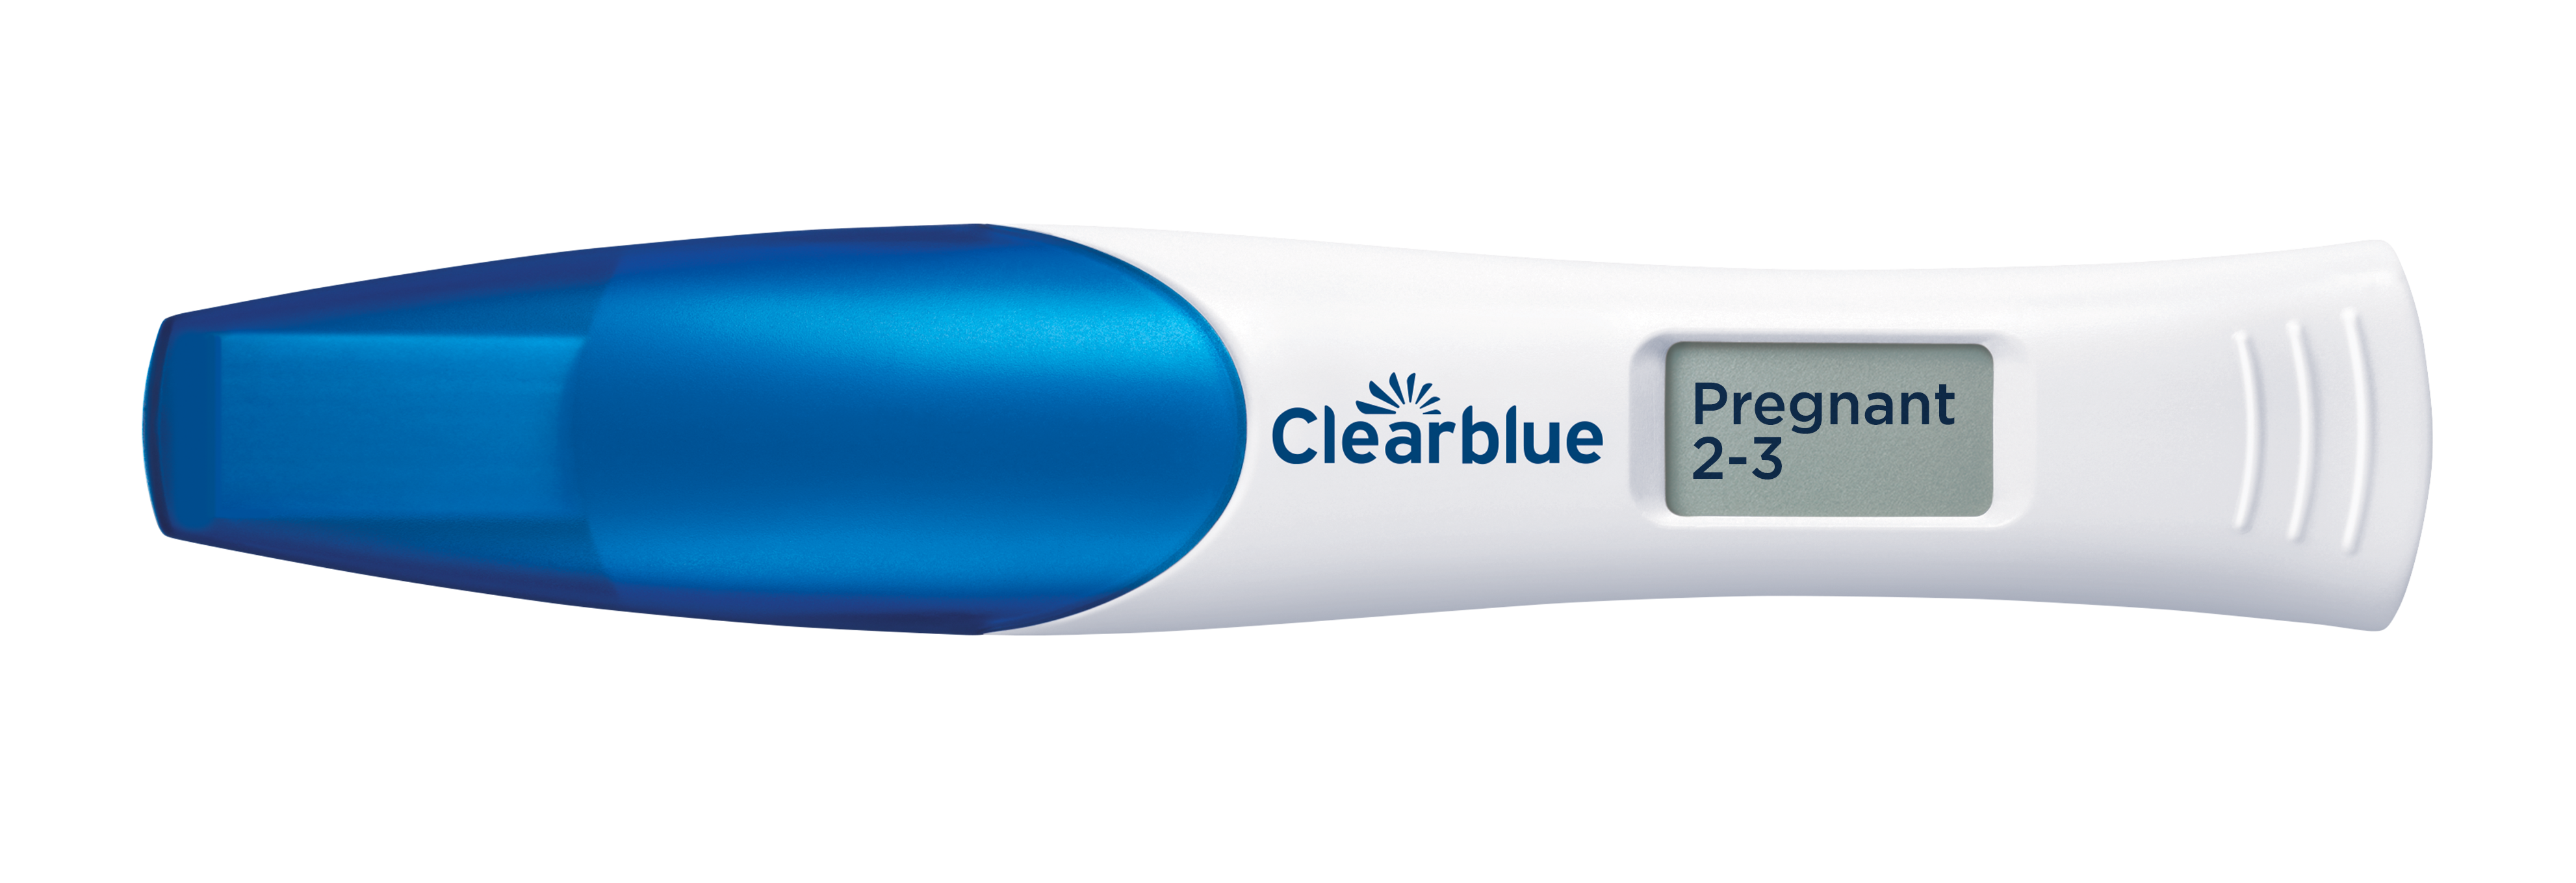 Clearblue® Pregnancy Test with Weeks Indicator